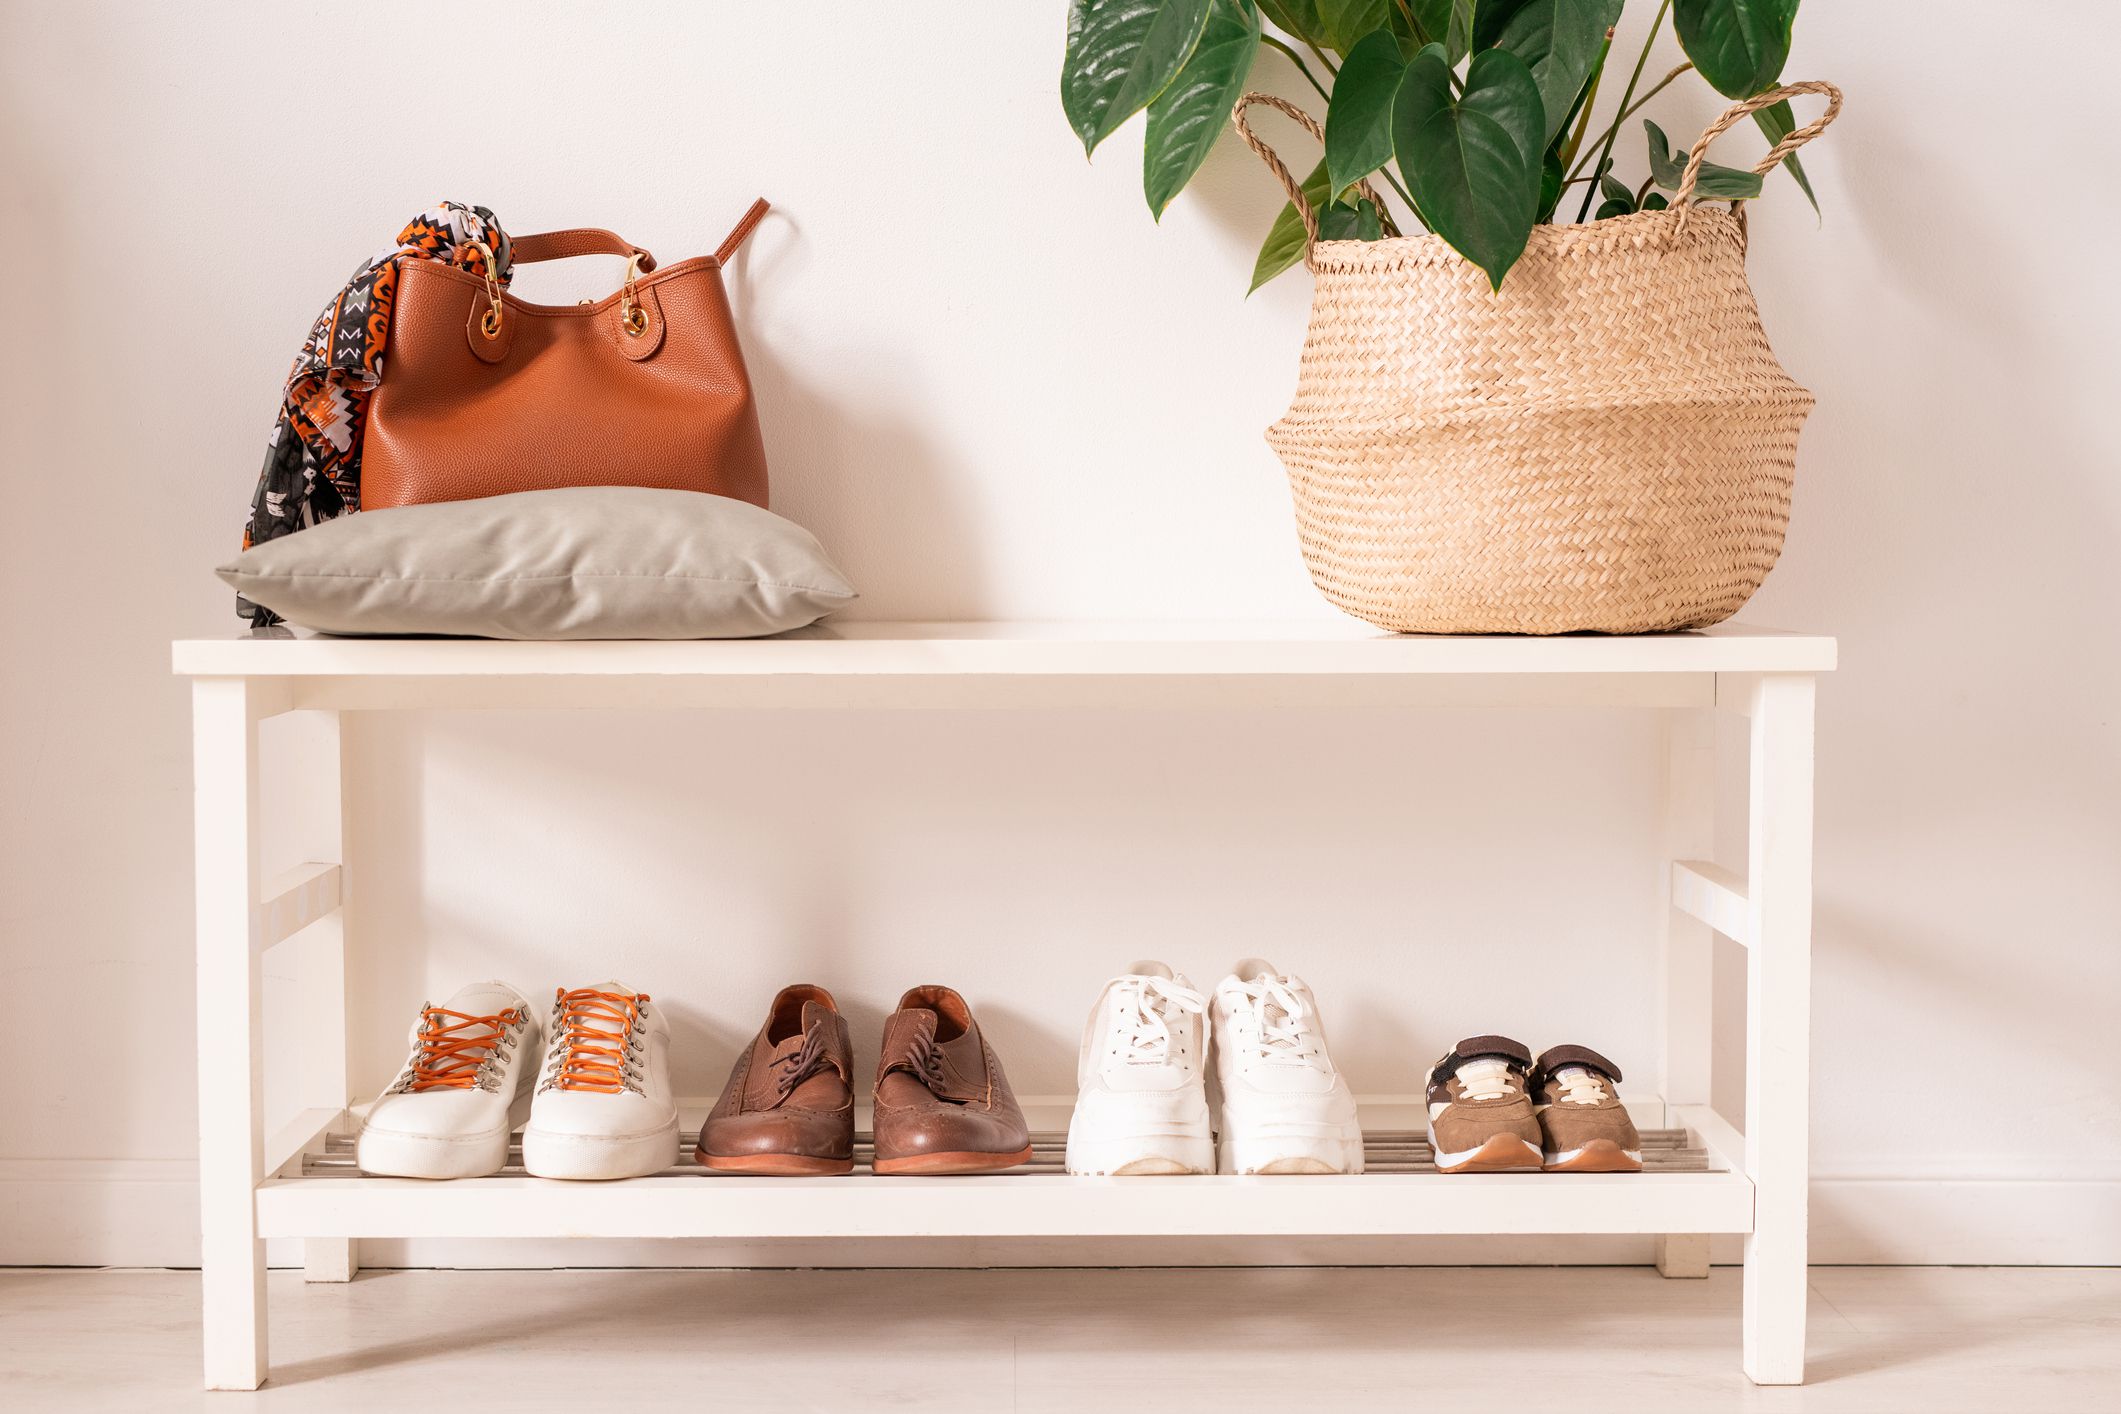 36 Organizing Hacks to Help You Conquer Clutter